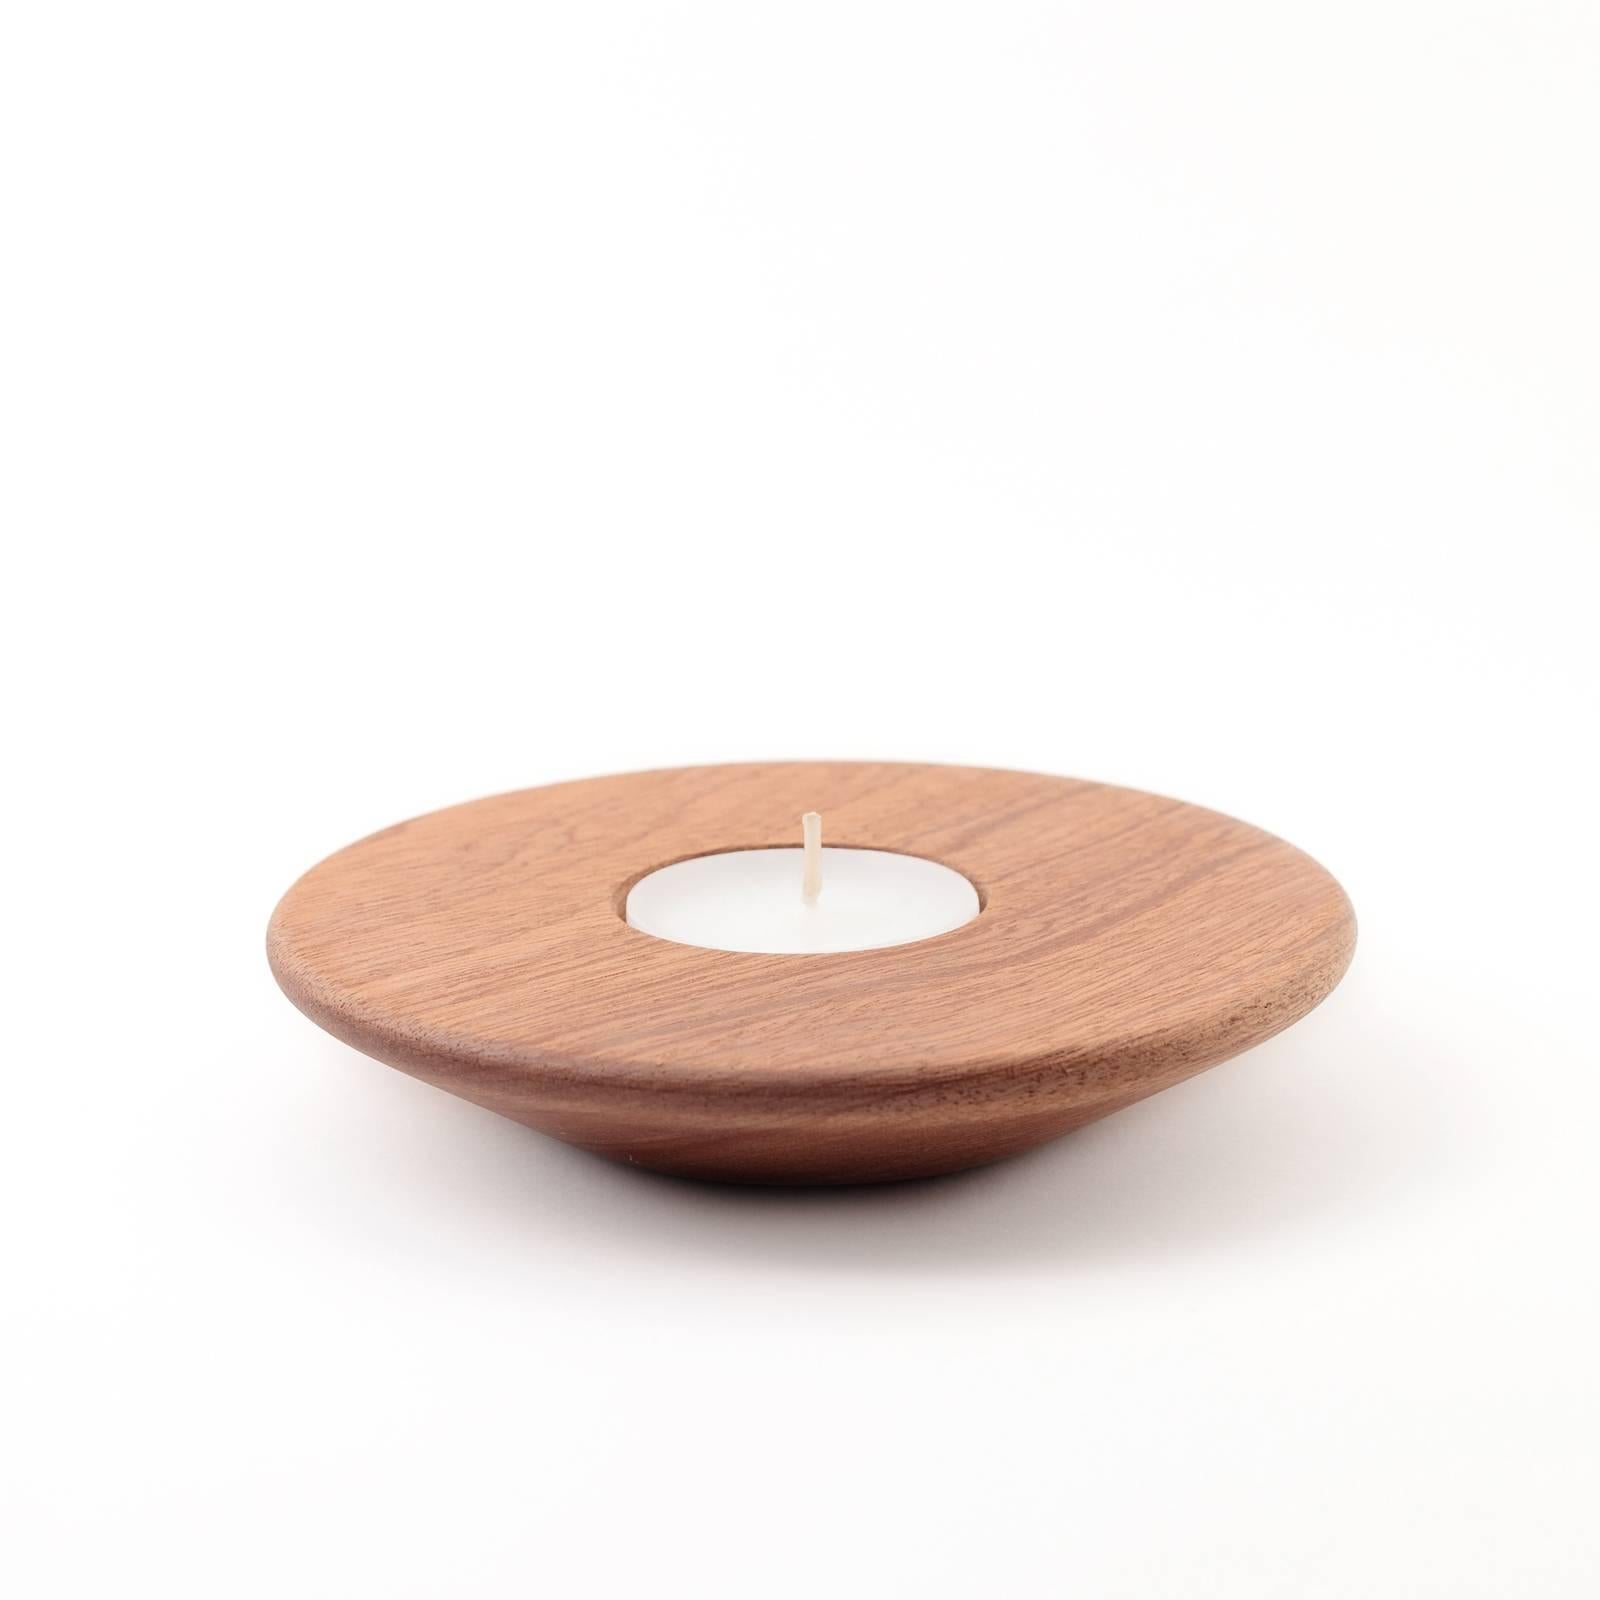 Recreate moonlight glinting off the coast of Normandy with our Nocturne tea light holder, the smaller counterpart to our Nocturne candle holder. Group together different sizes, wood and brass finishes for a contemporary take on a traditional